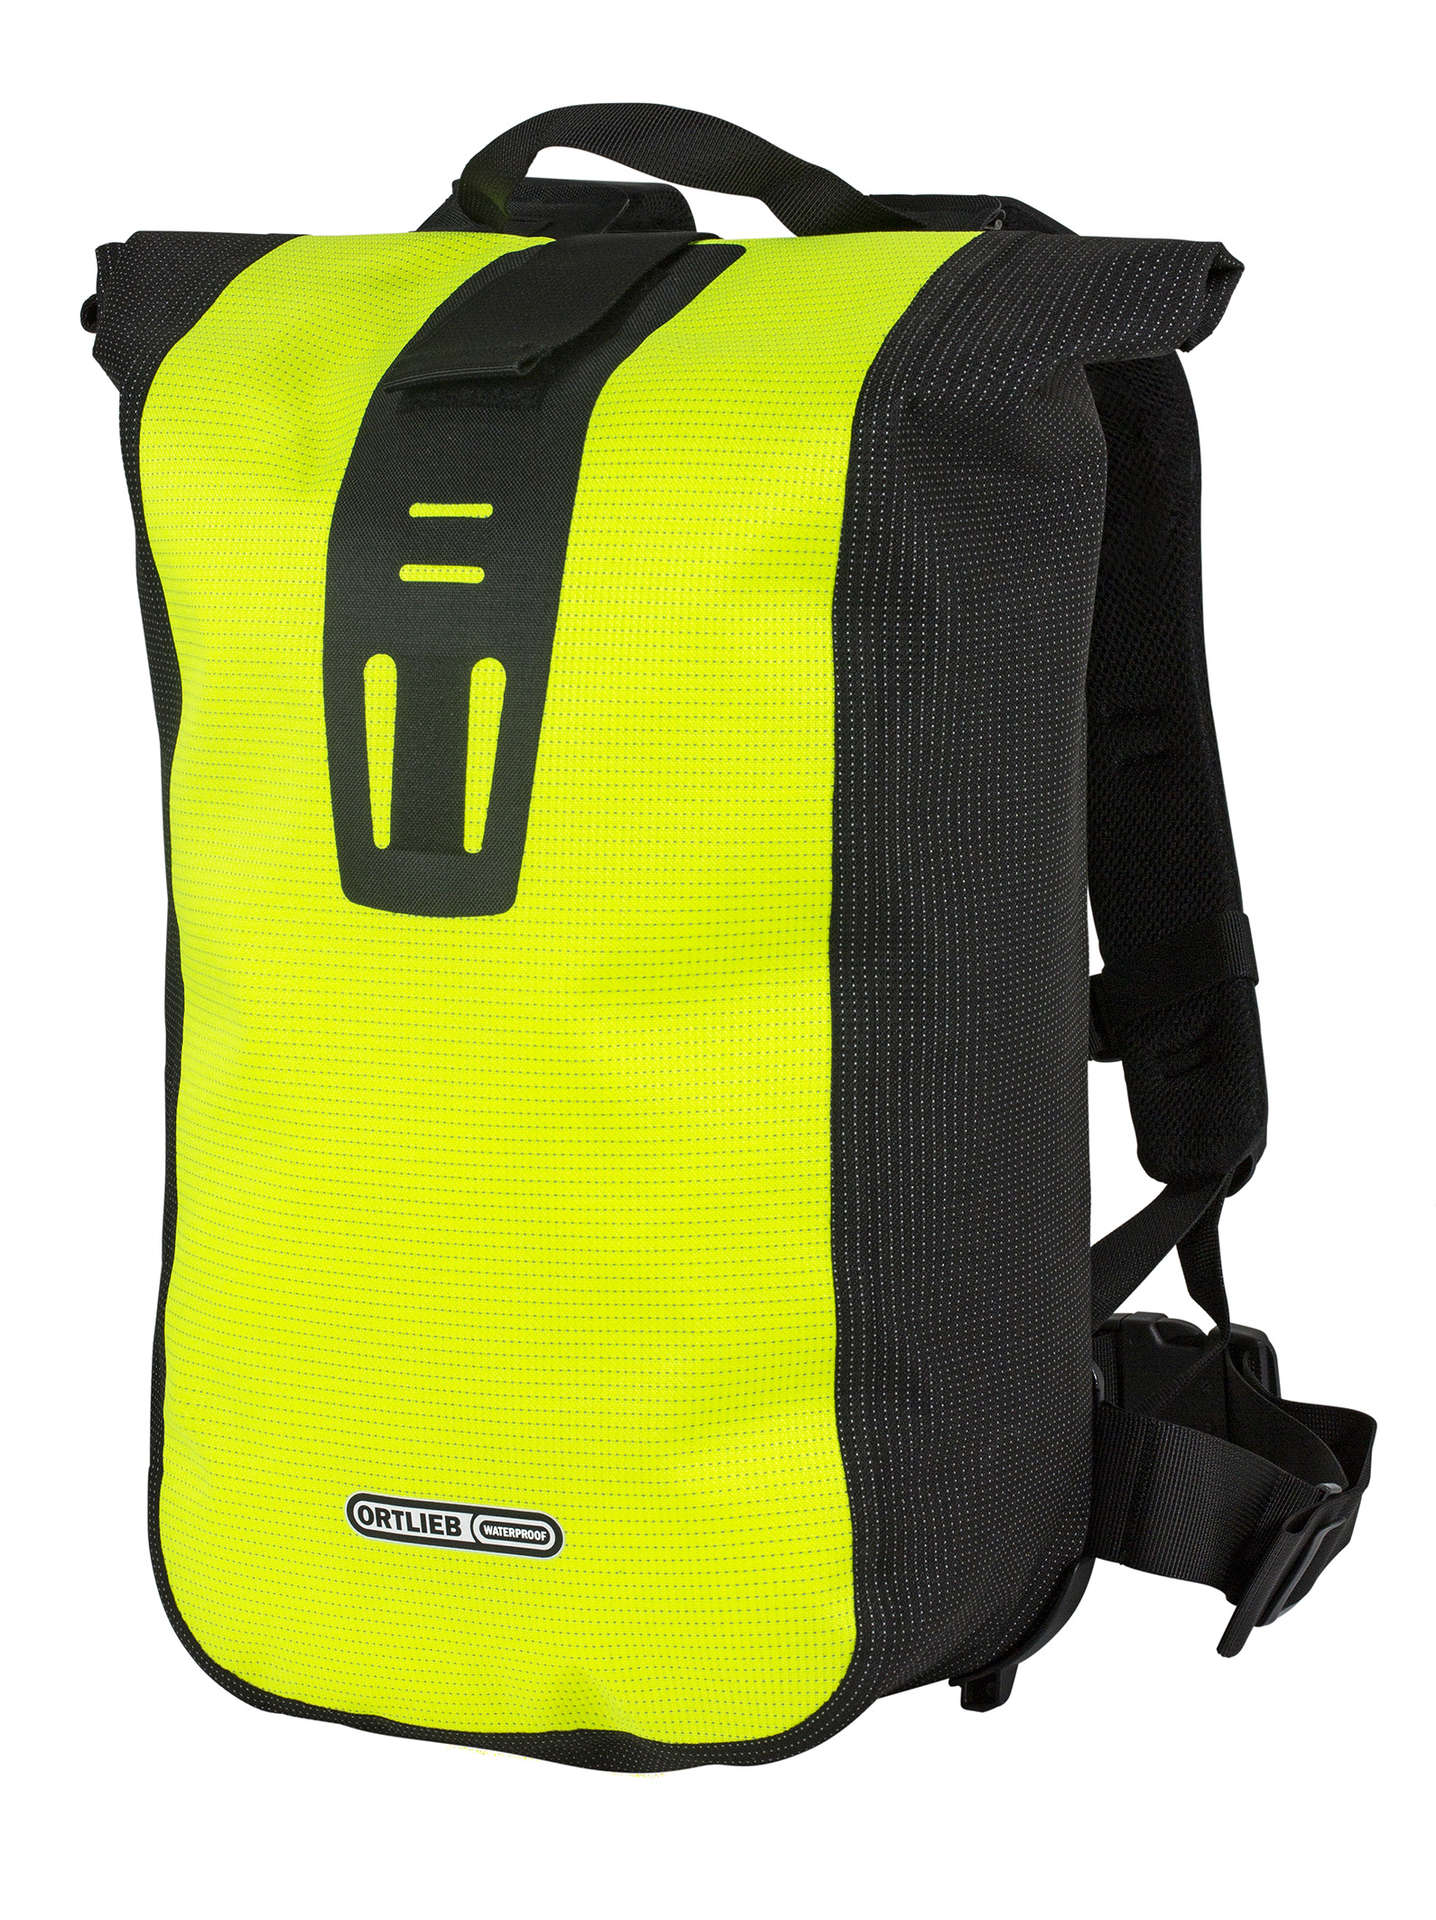 ORTLIEB Velocity Rugzak High Visibility  Fluo Geel Reflective